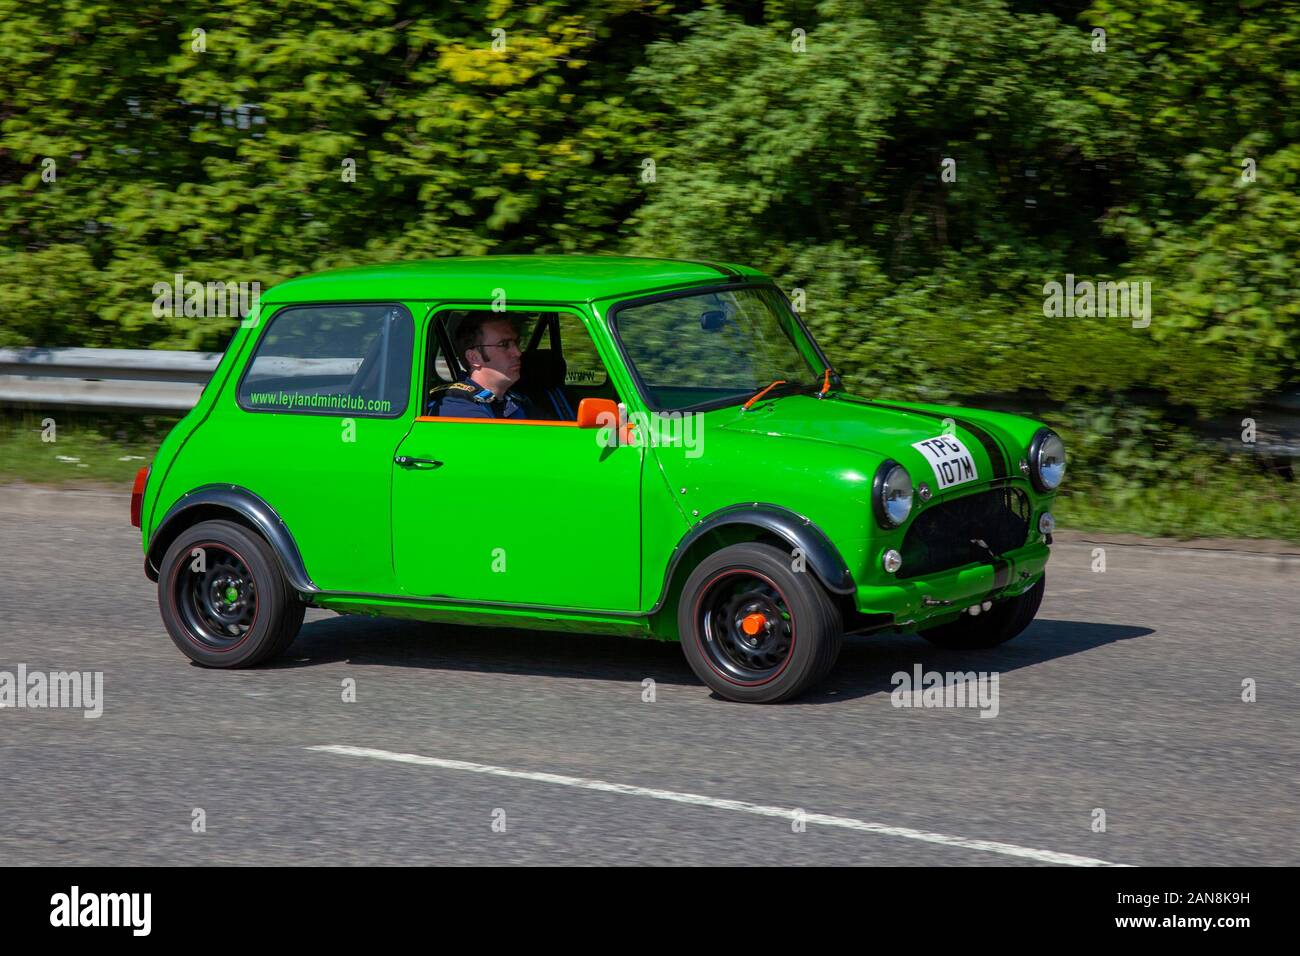 1973 70s seventies Green Morris Mini 1000, Petrol 998 cc classic cars, veteran and heritage, cherished oldtimers en-route to Pendle Power Fest, Motor show in Lancashire, UK Stock Photo